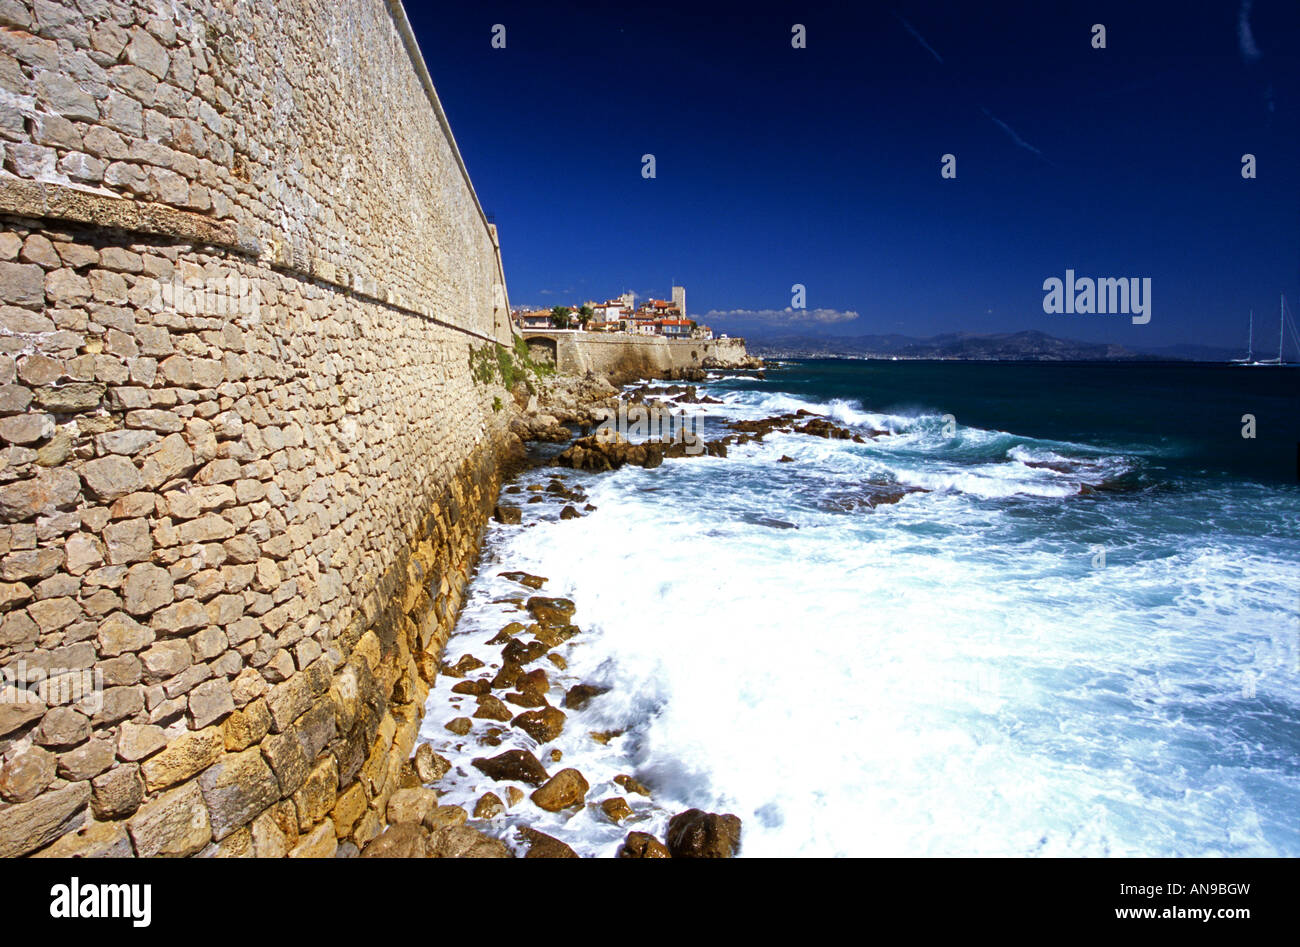 Antibes Alpes-Maritimes 06 French Riviera Cote d'azur PACA France Europe Stock Photo